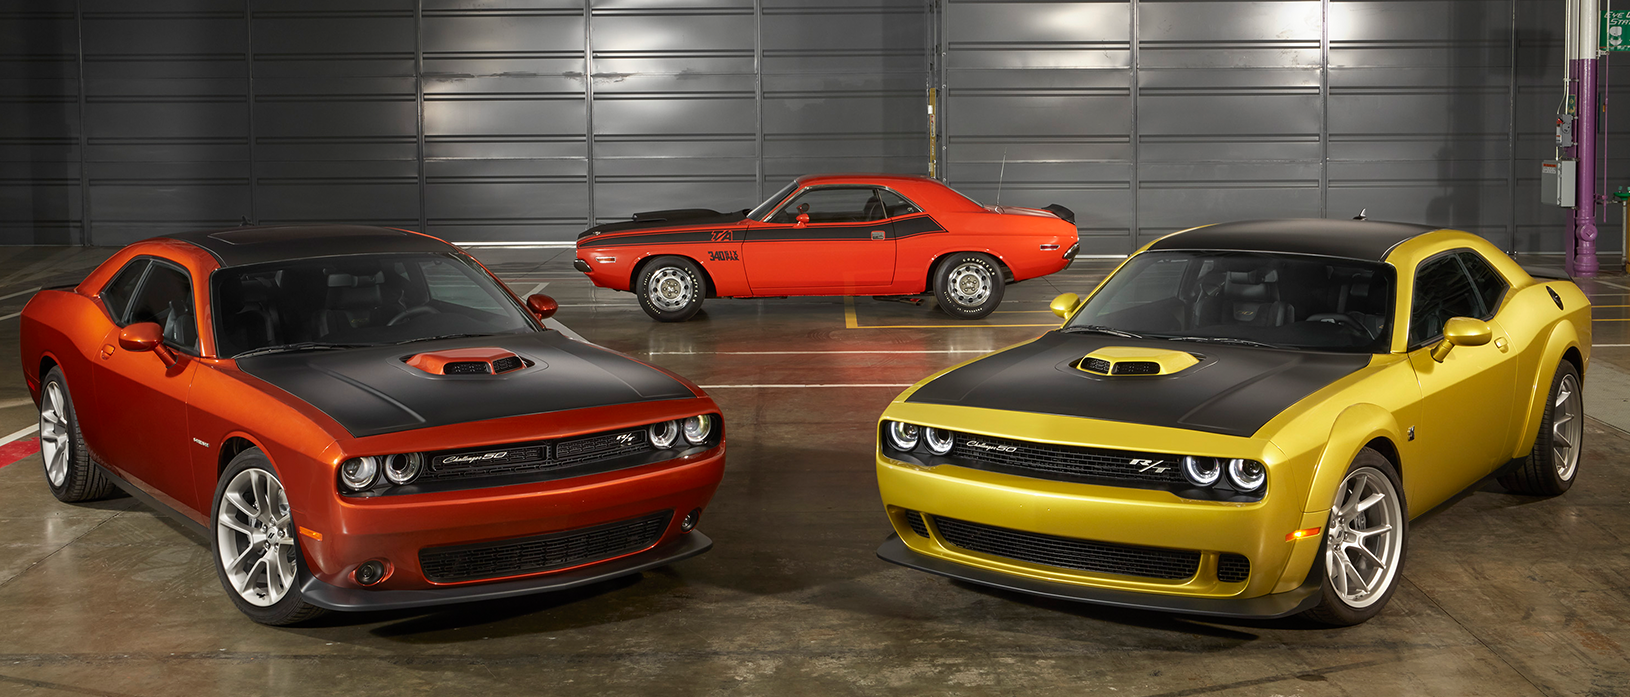 50 Years and Zero Chance of Growing Up: Dodge Introduces Limited Production Challenger 50th Anniversary Edition at 2019 AutoMobility LA